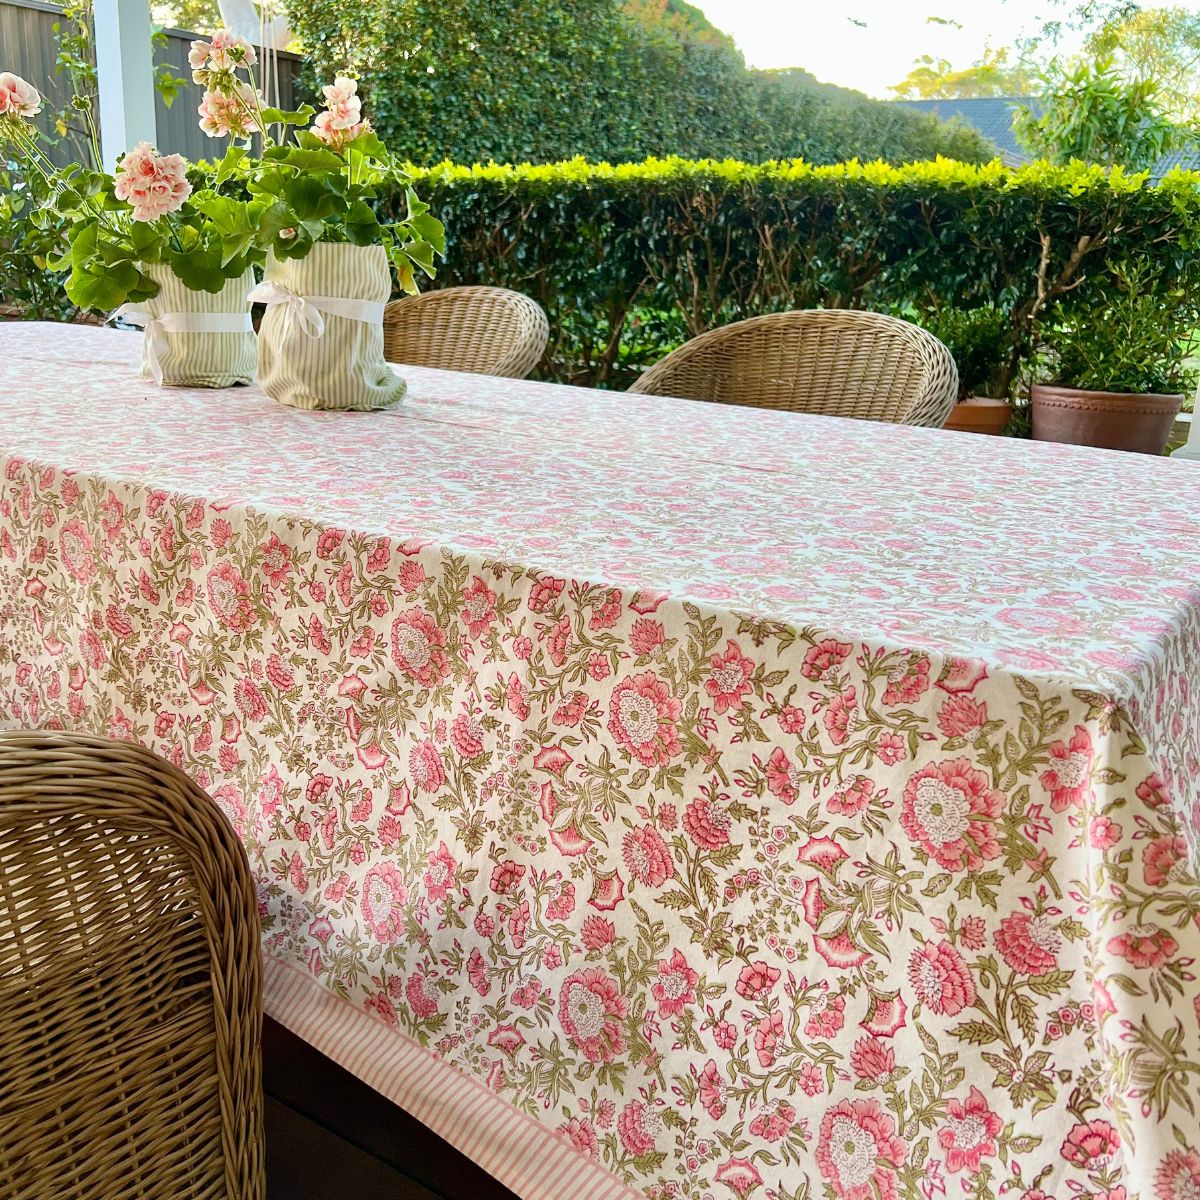 Sample Beatrice pink and green Tablecloth 180 x 345 cm